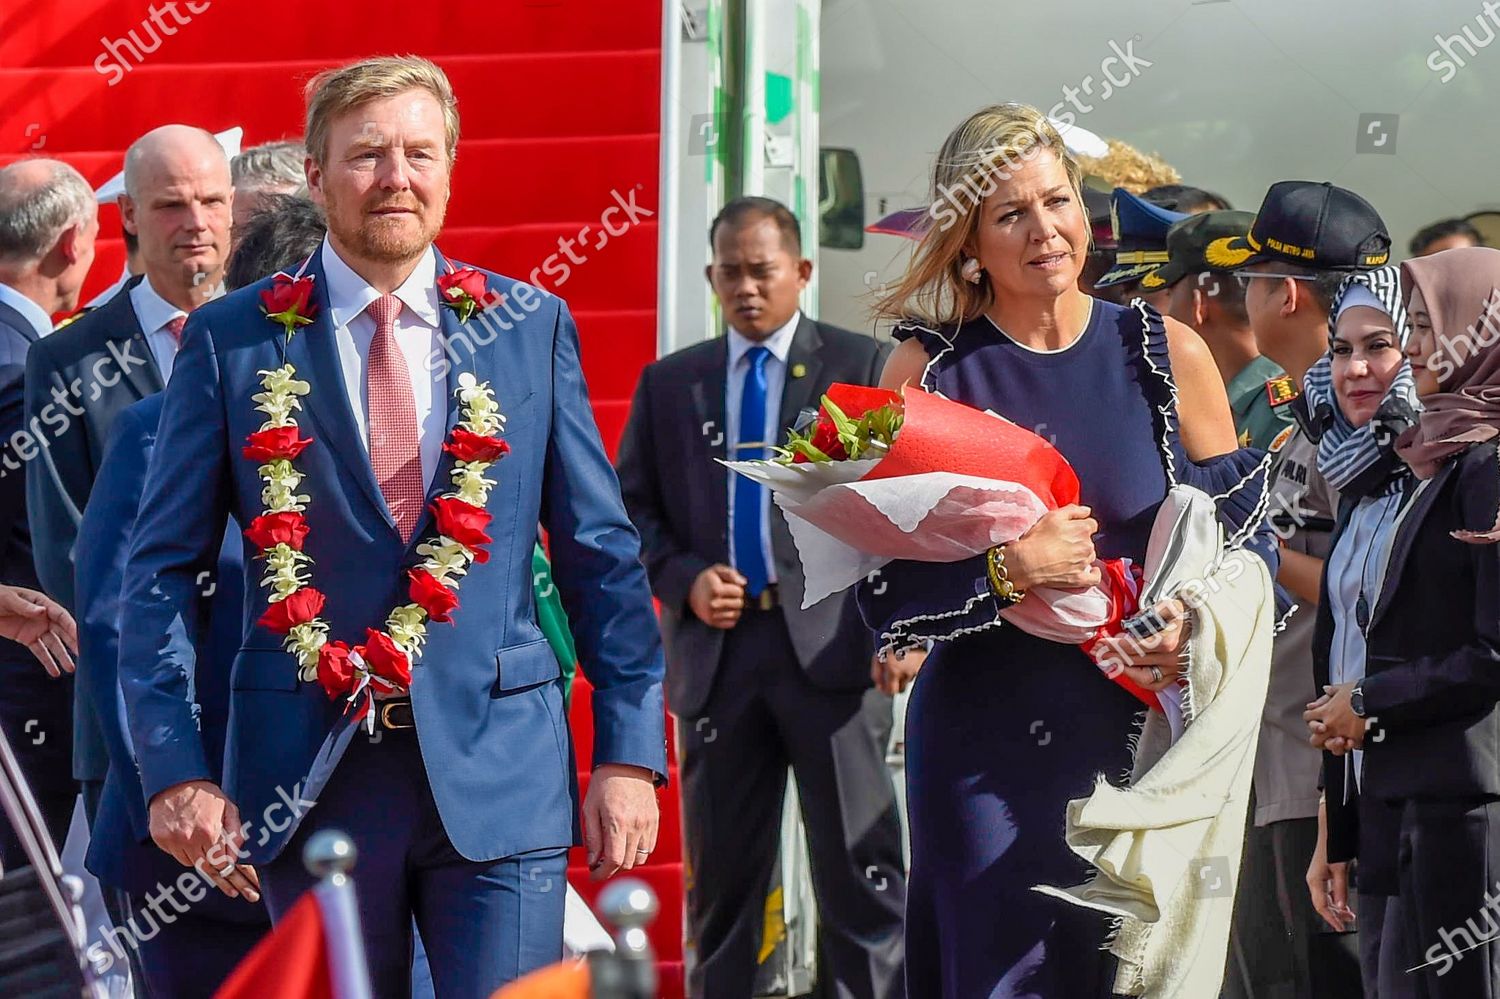 dutch-royals-visit-to-indonesia-shutterstock-editorial-10577696a.jpg